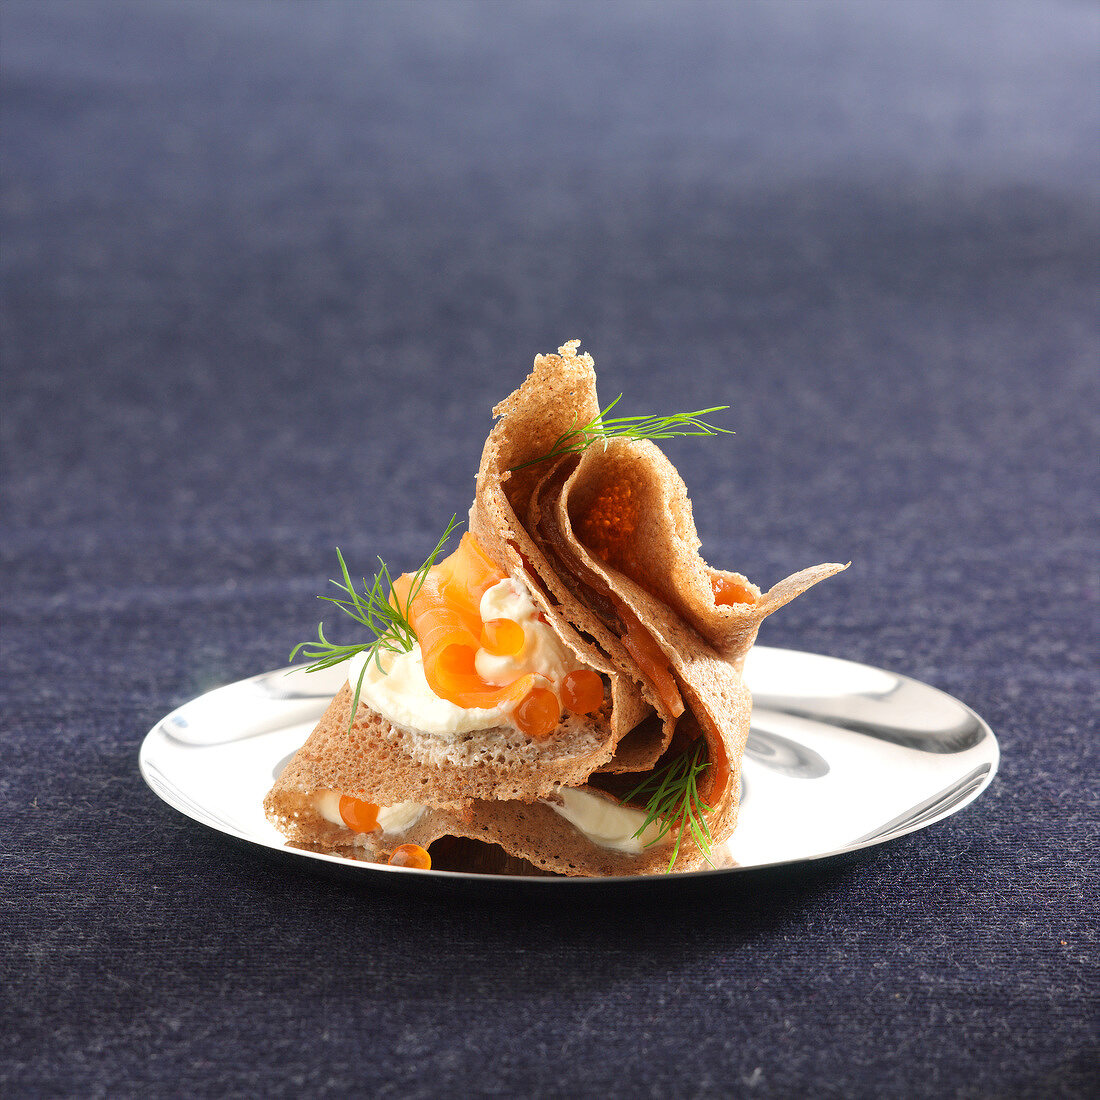 Buckwheat pancake with smoked salmon and Fromage frais